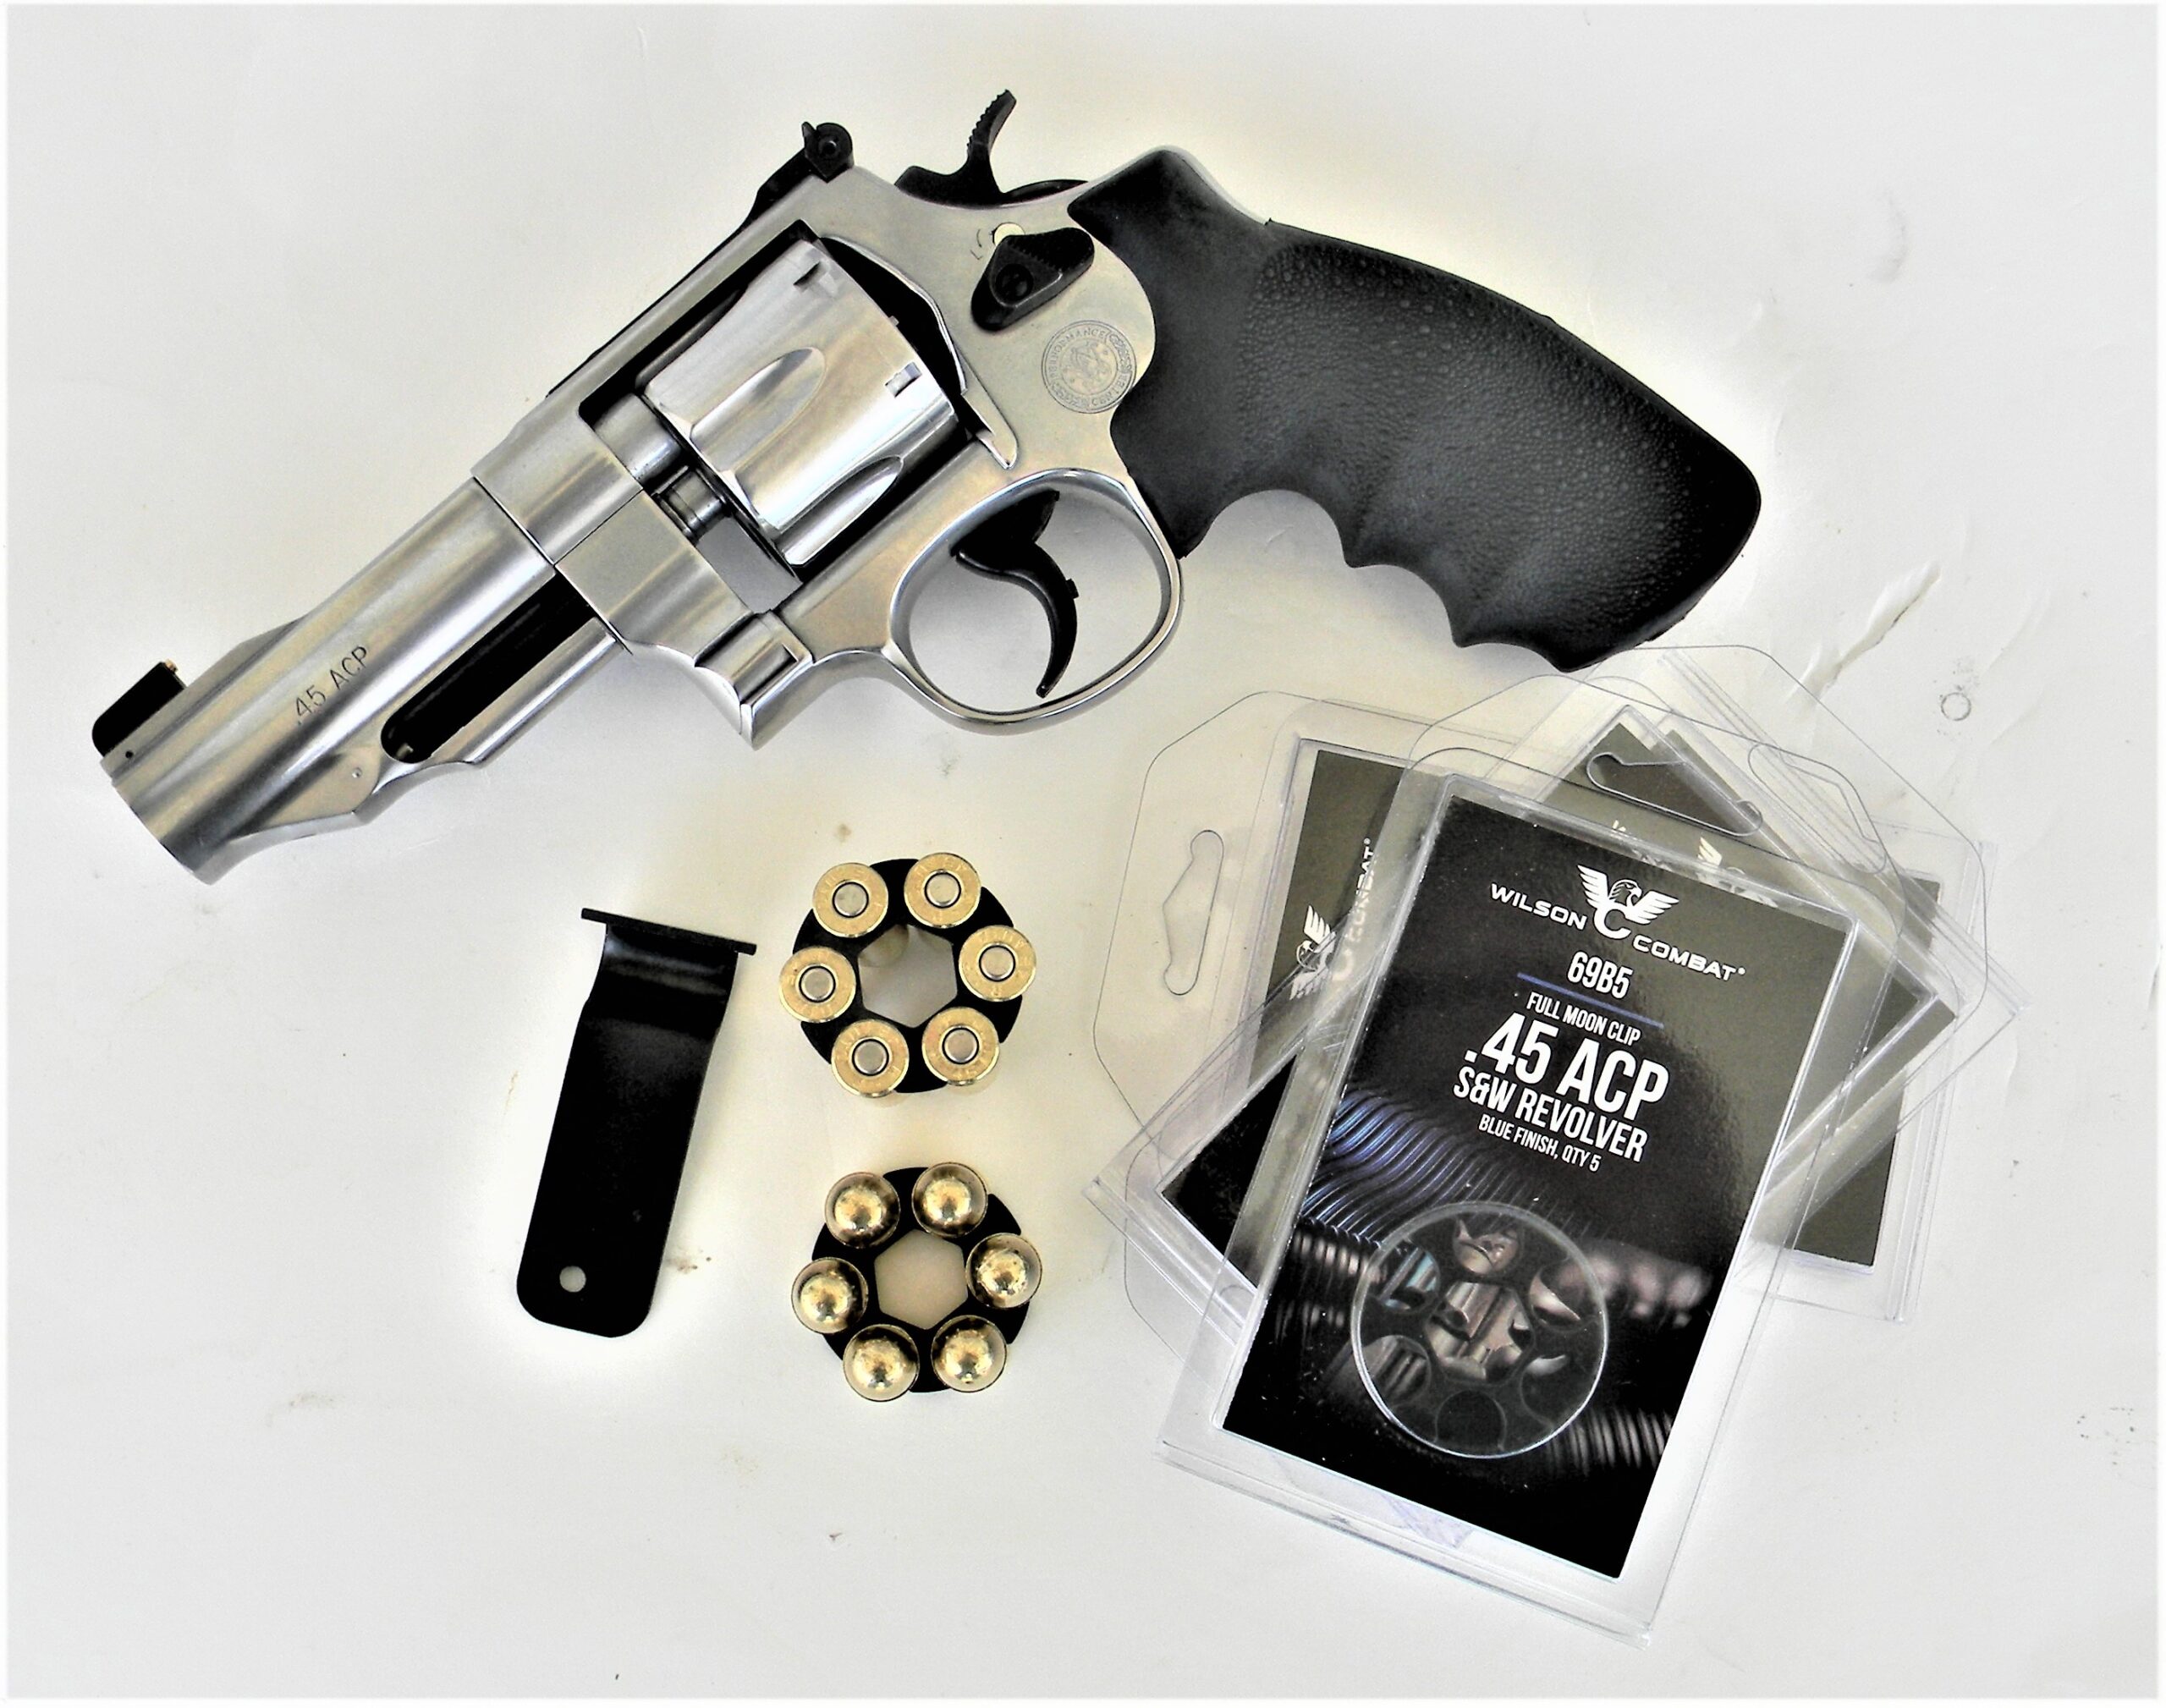 45 caliber smith and wesson